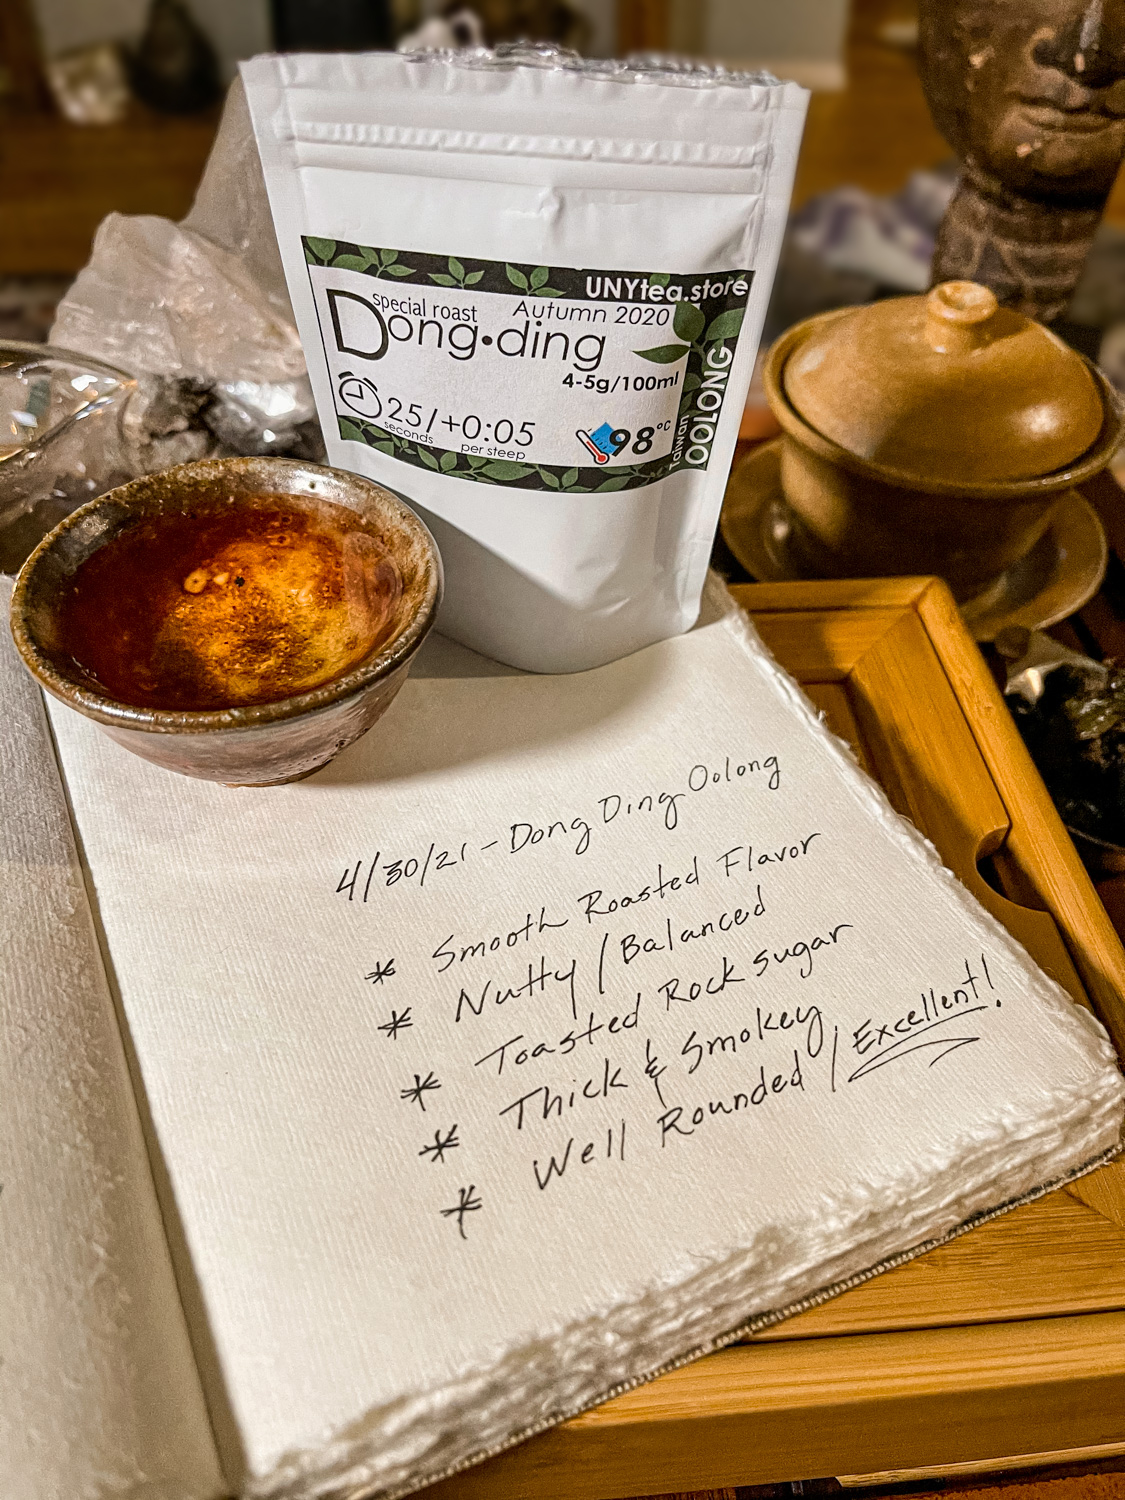 DONG DING SPECIAL ROAST – UNY TEA